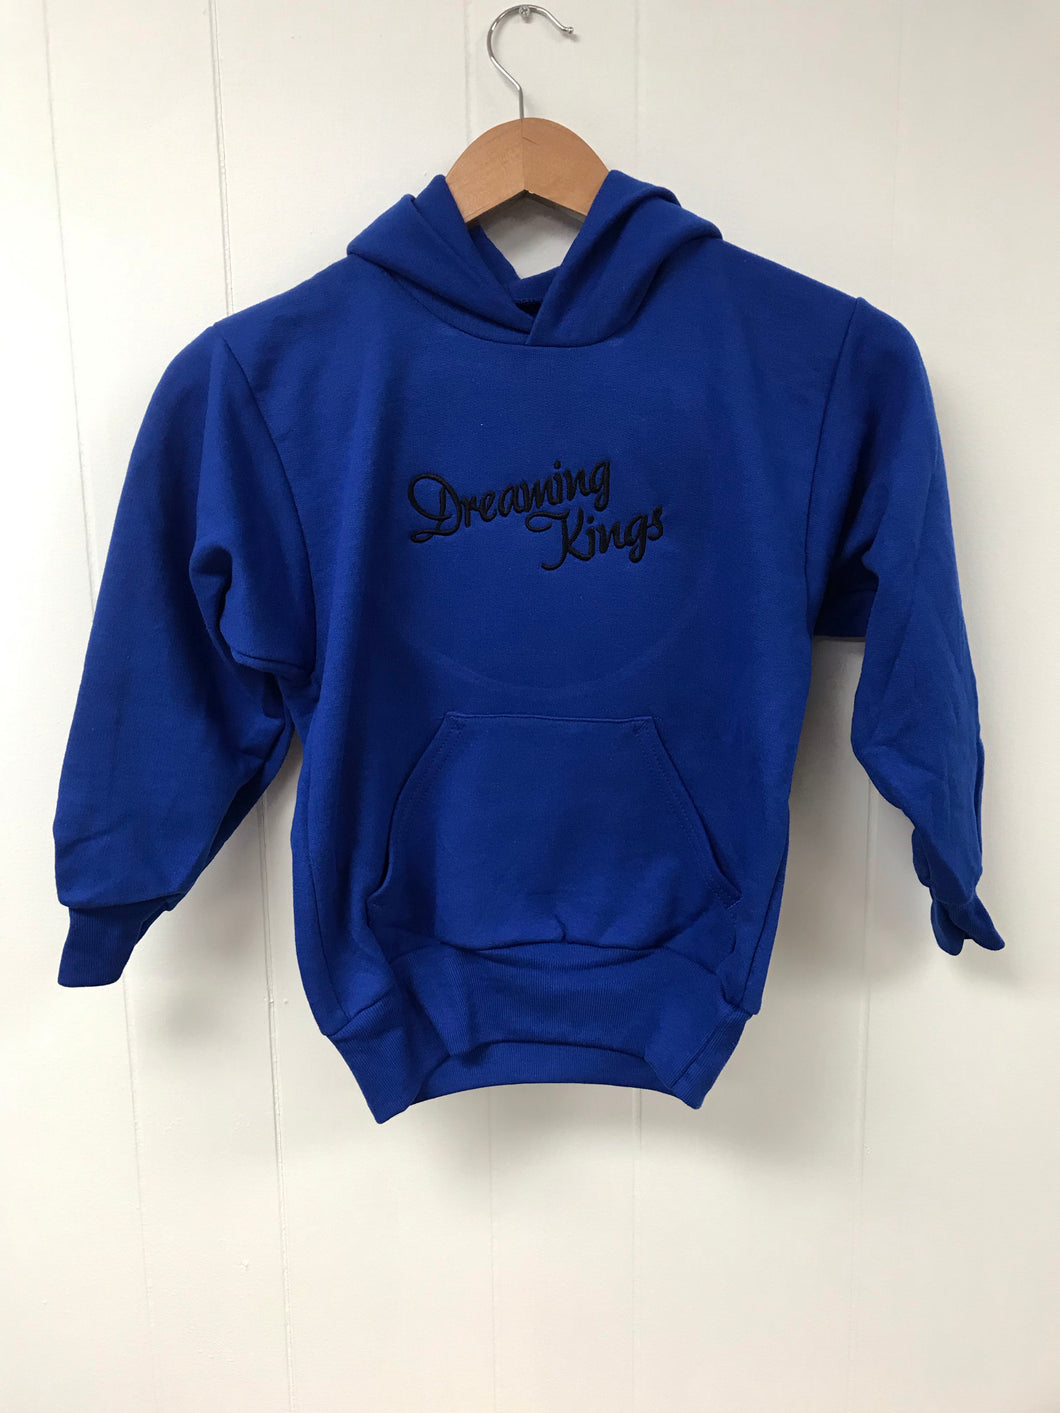 Dreaming Kings “Young King” Hoodies (Various Colors Available)